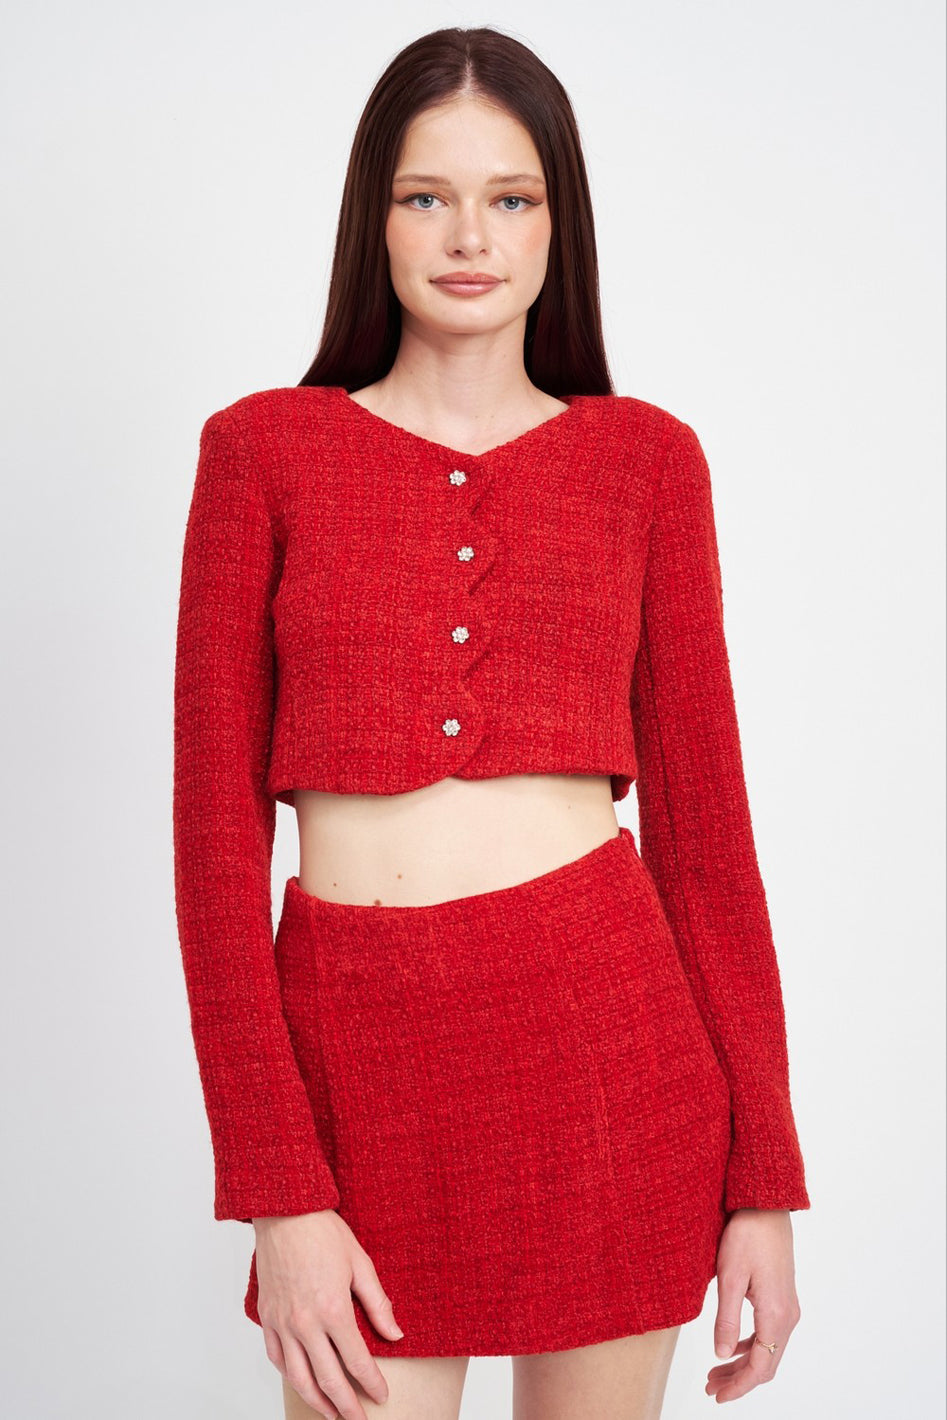 LONG SLEEVE BUTTON UP CROPPED TOP - Azoroh